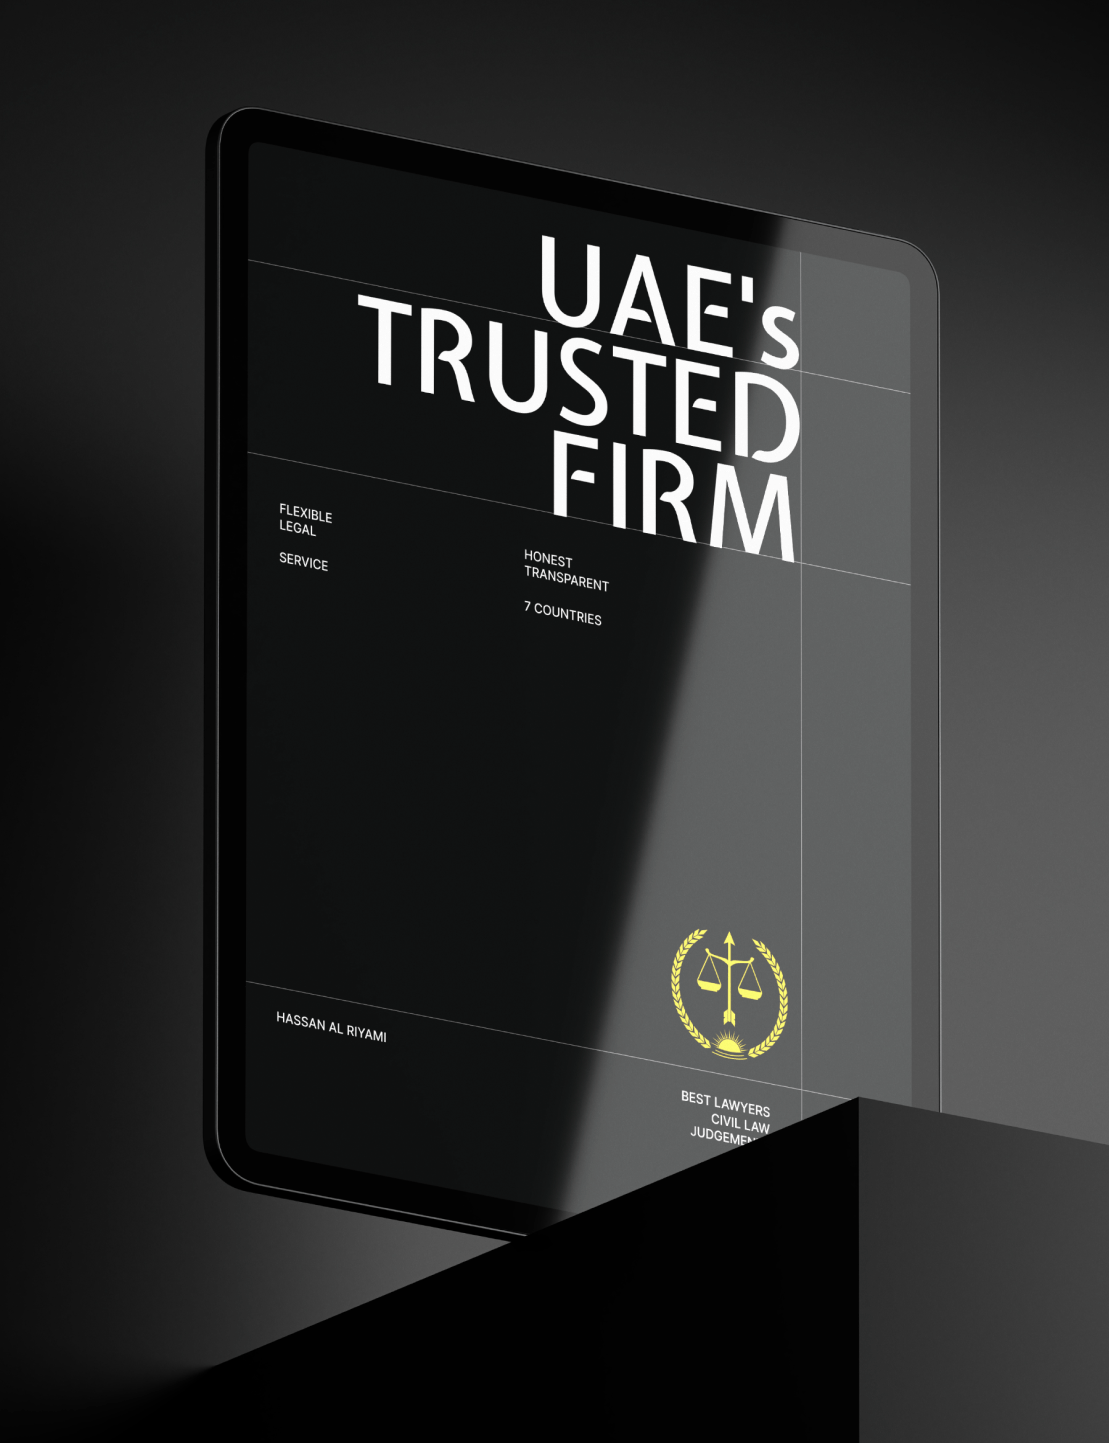 Wings legal branding image for a UAE based law firm Alriyami Advocates